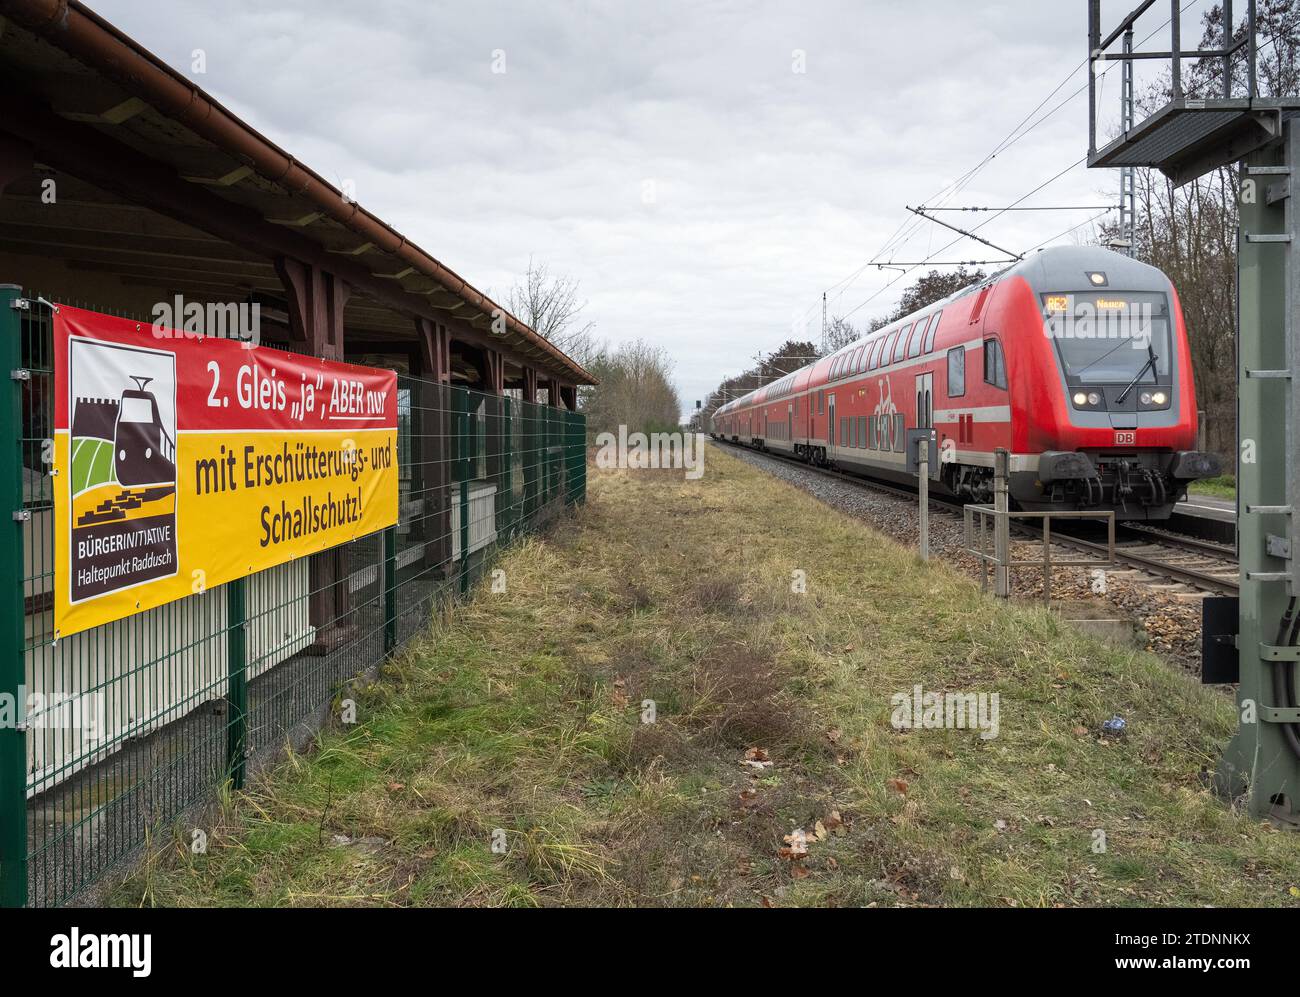 https://c8.alamy.com/comp/2TDNNKX/19-december-2023-brandenburg-vetschauot-raddusch-the-regional-express-train-re2-with-destination-nauen-arrives-at-raddusch-station-from-cottbus-a-poster-from-the-raddusch-stopping-point-citizens-initiative-hangs-on-the-former-station-building-with-the-demand-2nd-track-yes-but-only-with-vibration-and-noise-protection!-the-expansion-of-the-rail-link-between-lbbenau-and-cottbus-was-previously-explained-during-a-press-event-the-double-track-extension-would-allow-trains-to-run-every-half-hour-from-berlin-to-cottbus-photo-soeren-stachedpa-2TDNNKX.jpg